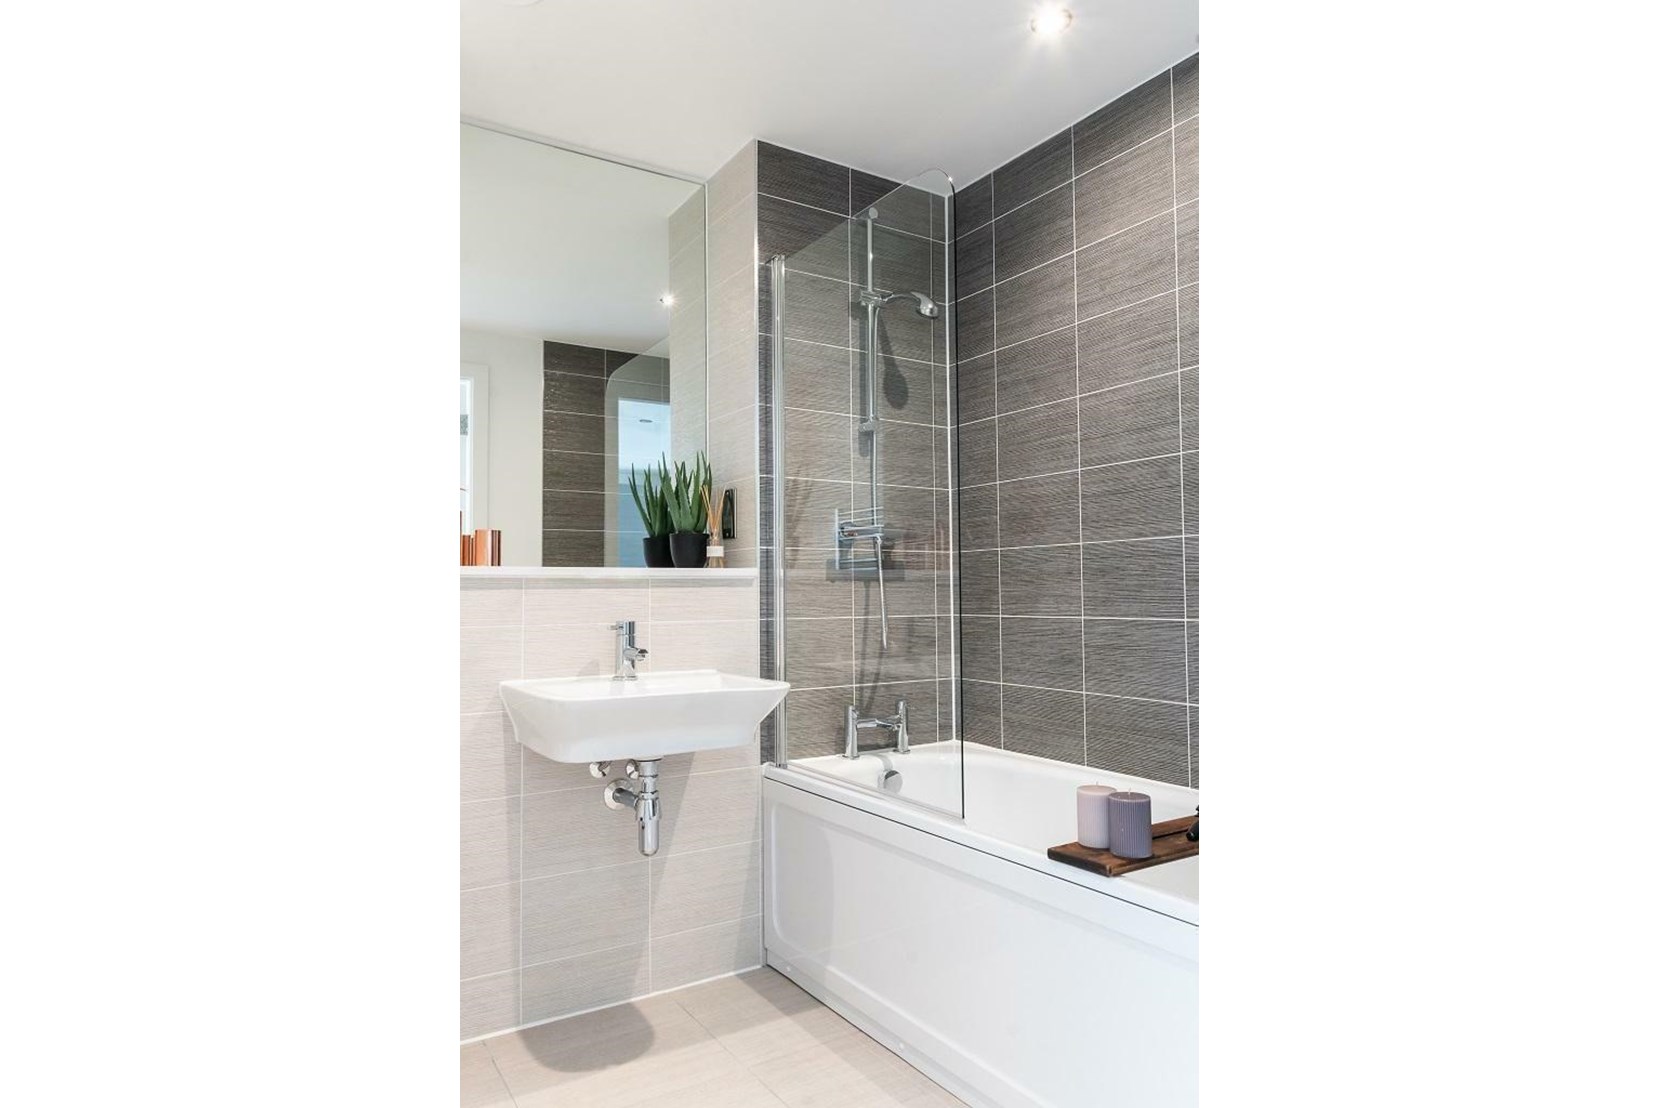 Apartments to Rent by Savills at The Astley, Manchester, M1, bathroom